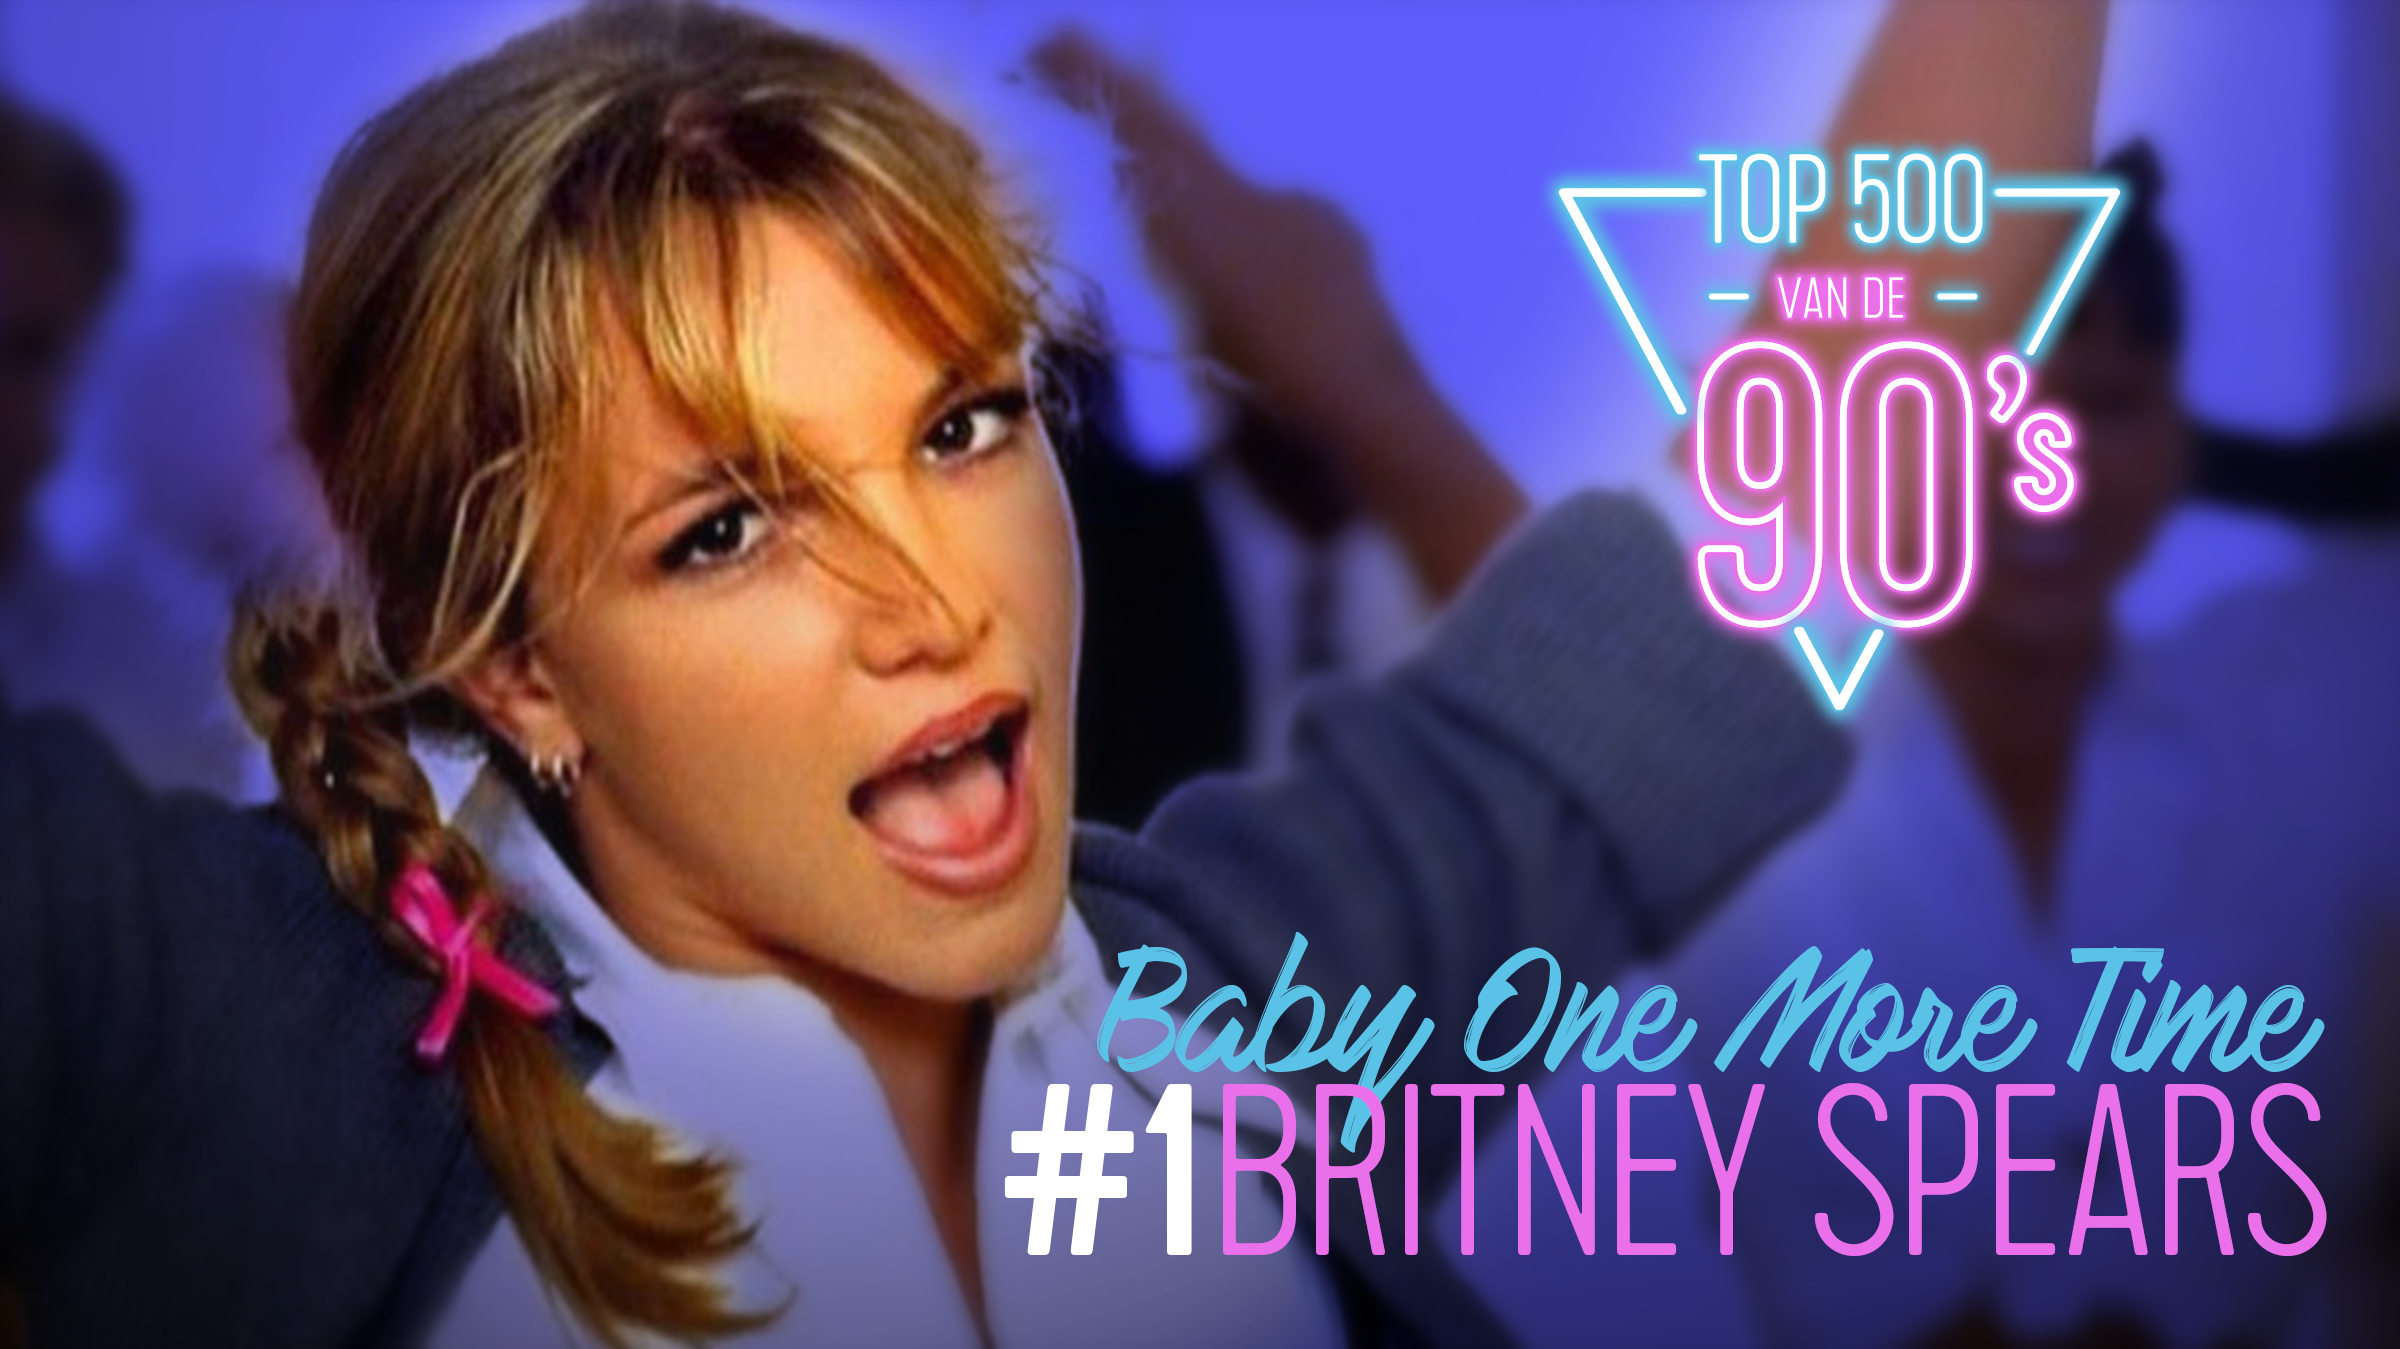 2022   top 500 vd 90 s   britney spears   baby one more time  mijlpaal 